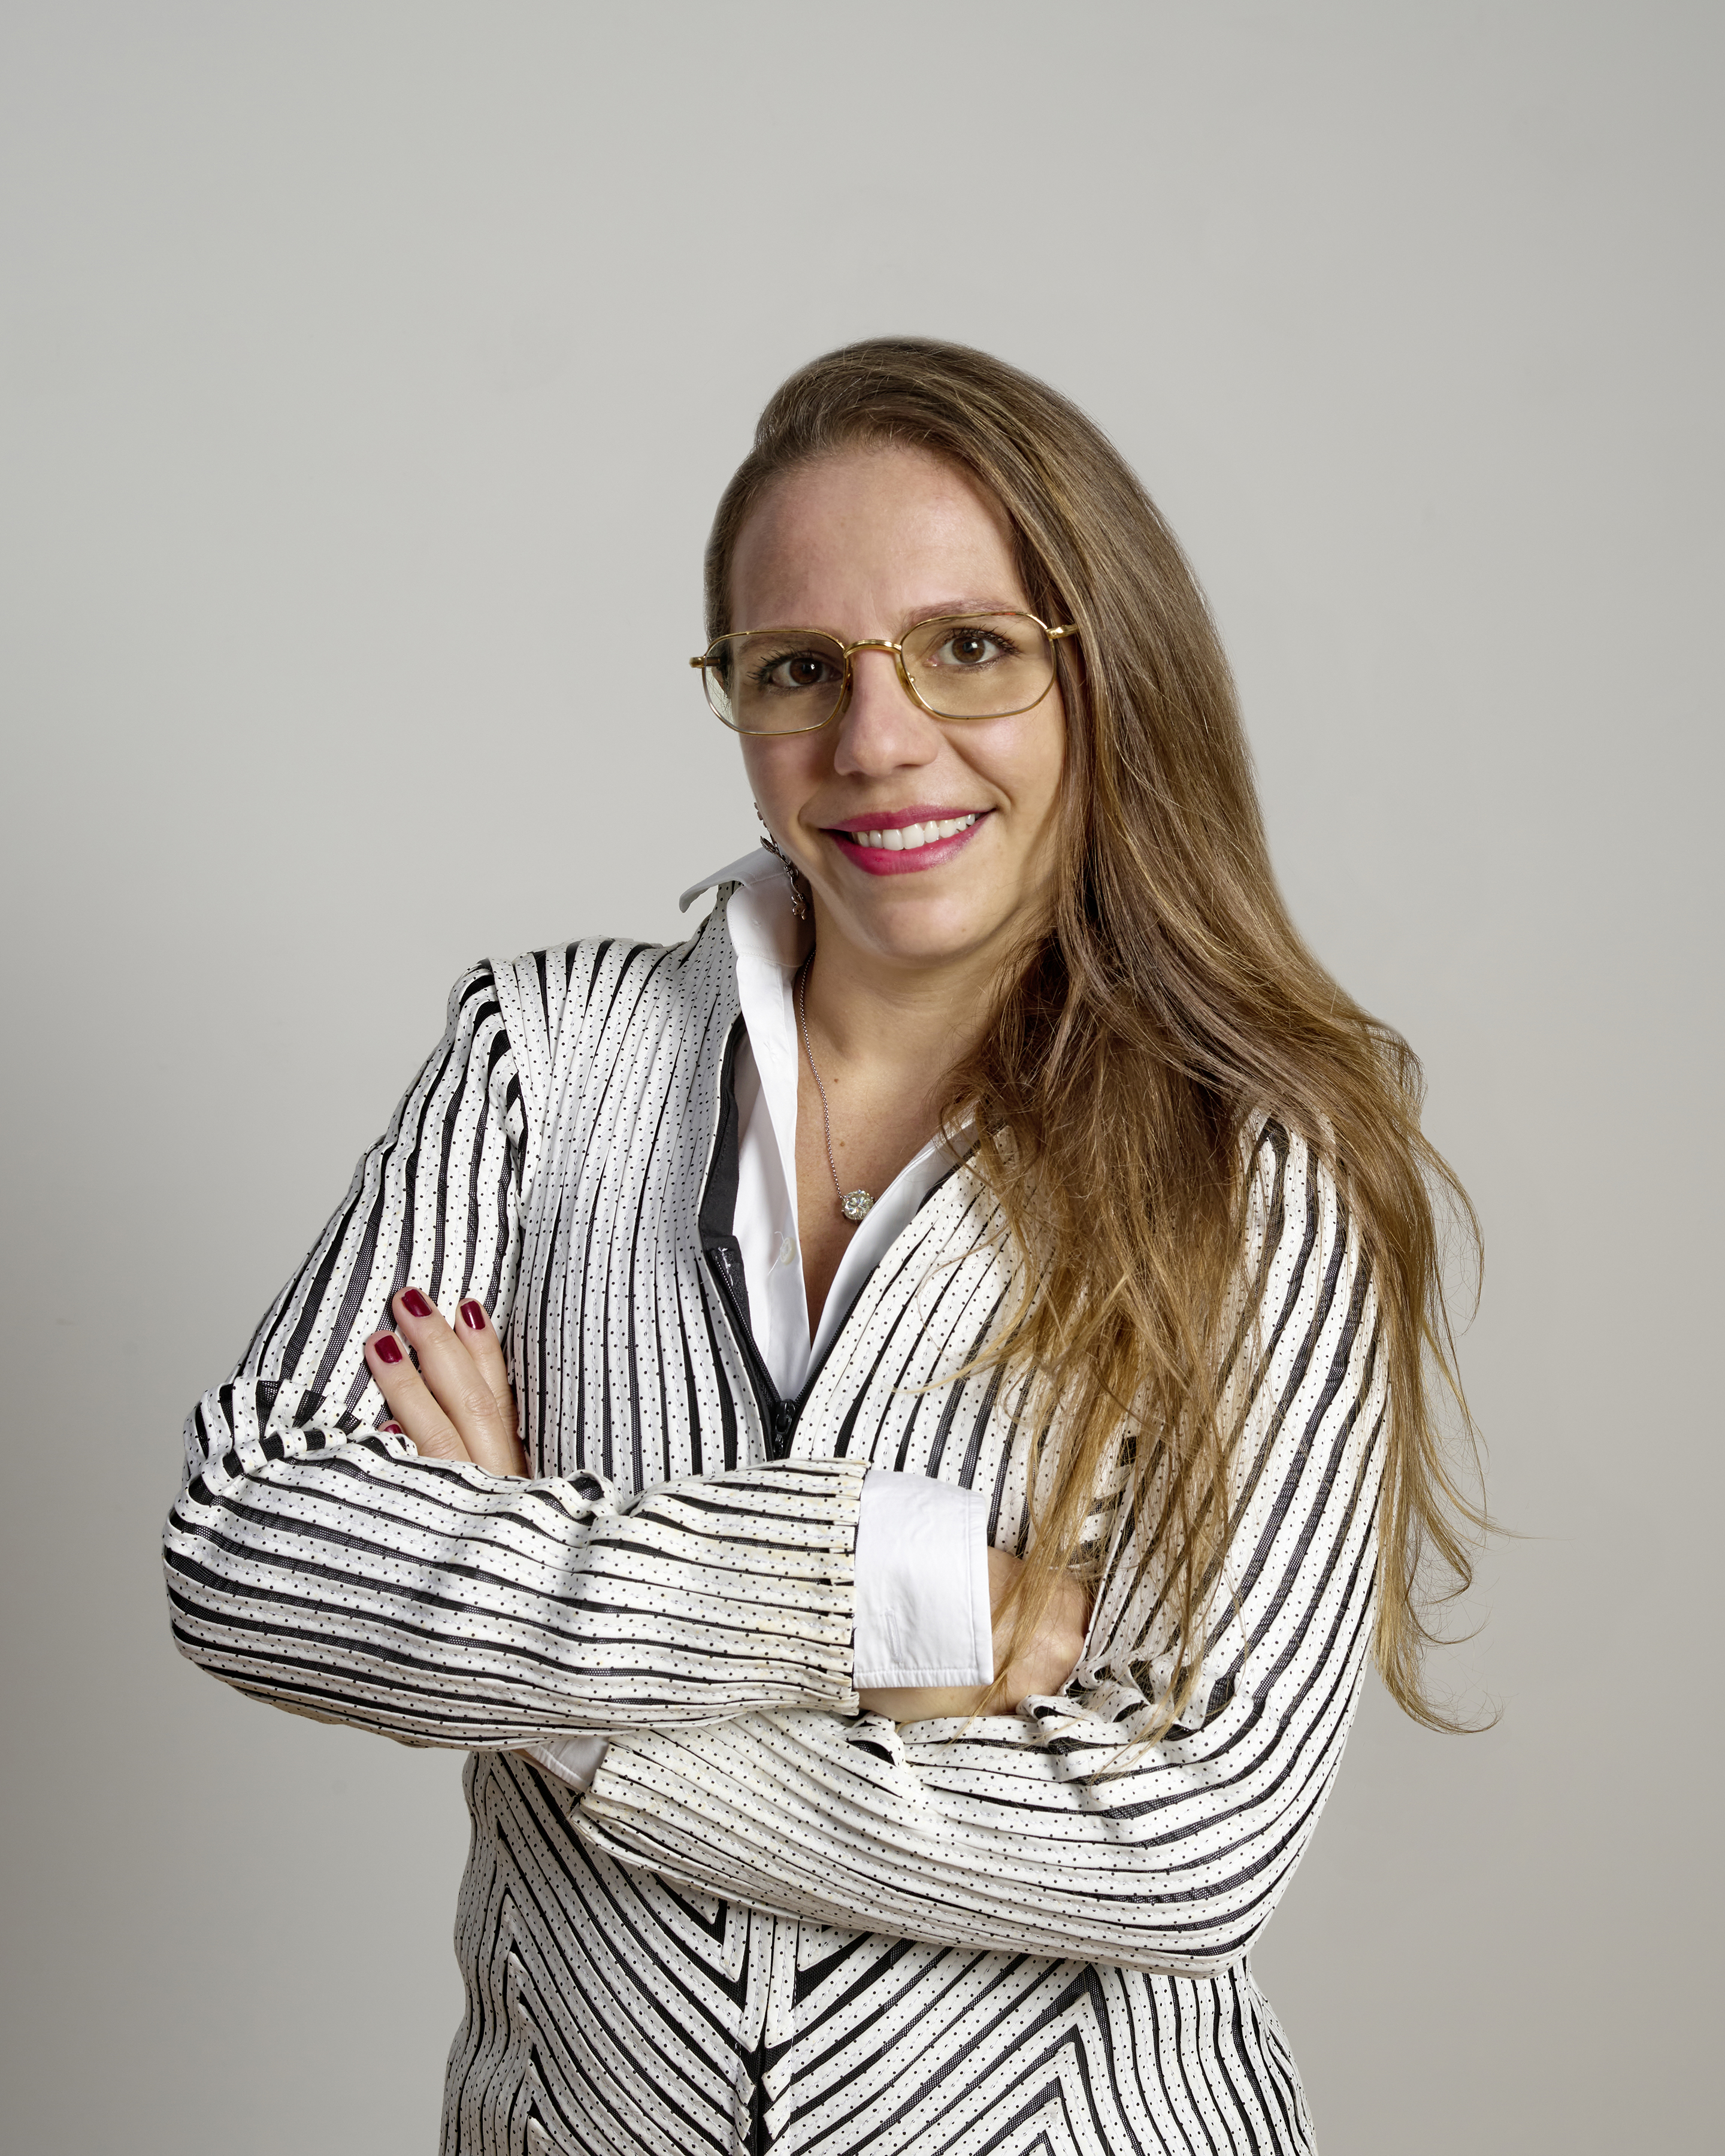 Bonhams has hired Bianca Cutait as a senior specialist in its Post-War & Contemporary Art department. She will be based in Miami. Image courtesy of Bonhams